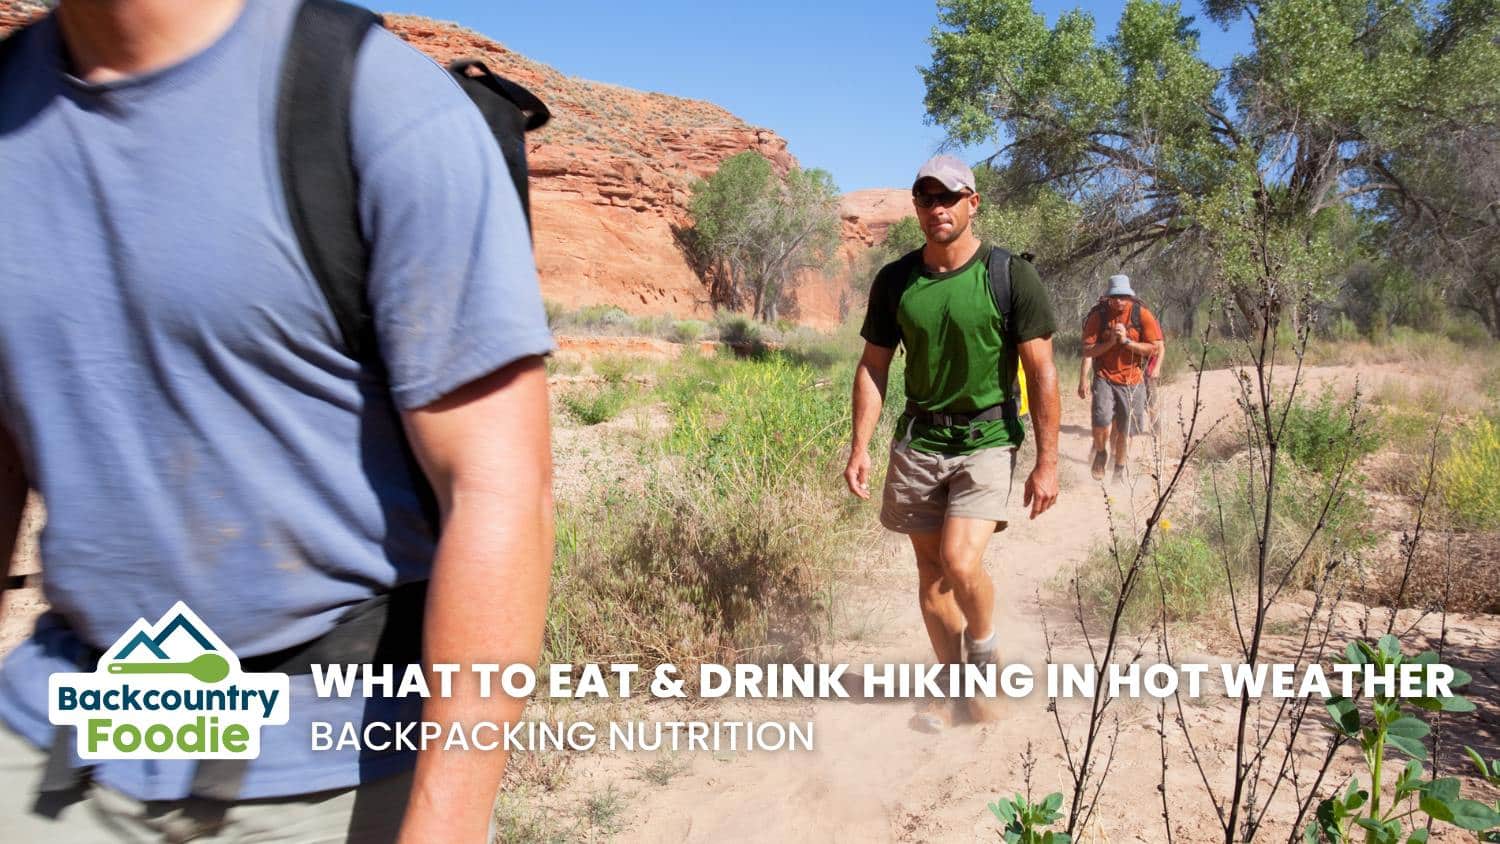 Backcountry Foodie What to Eat and Drink While Hiking in Hot Weather Backpacking Nutrition